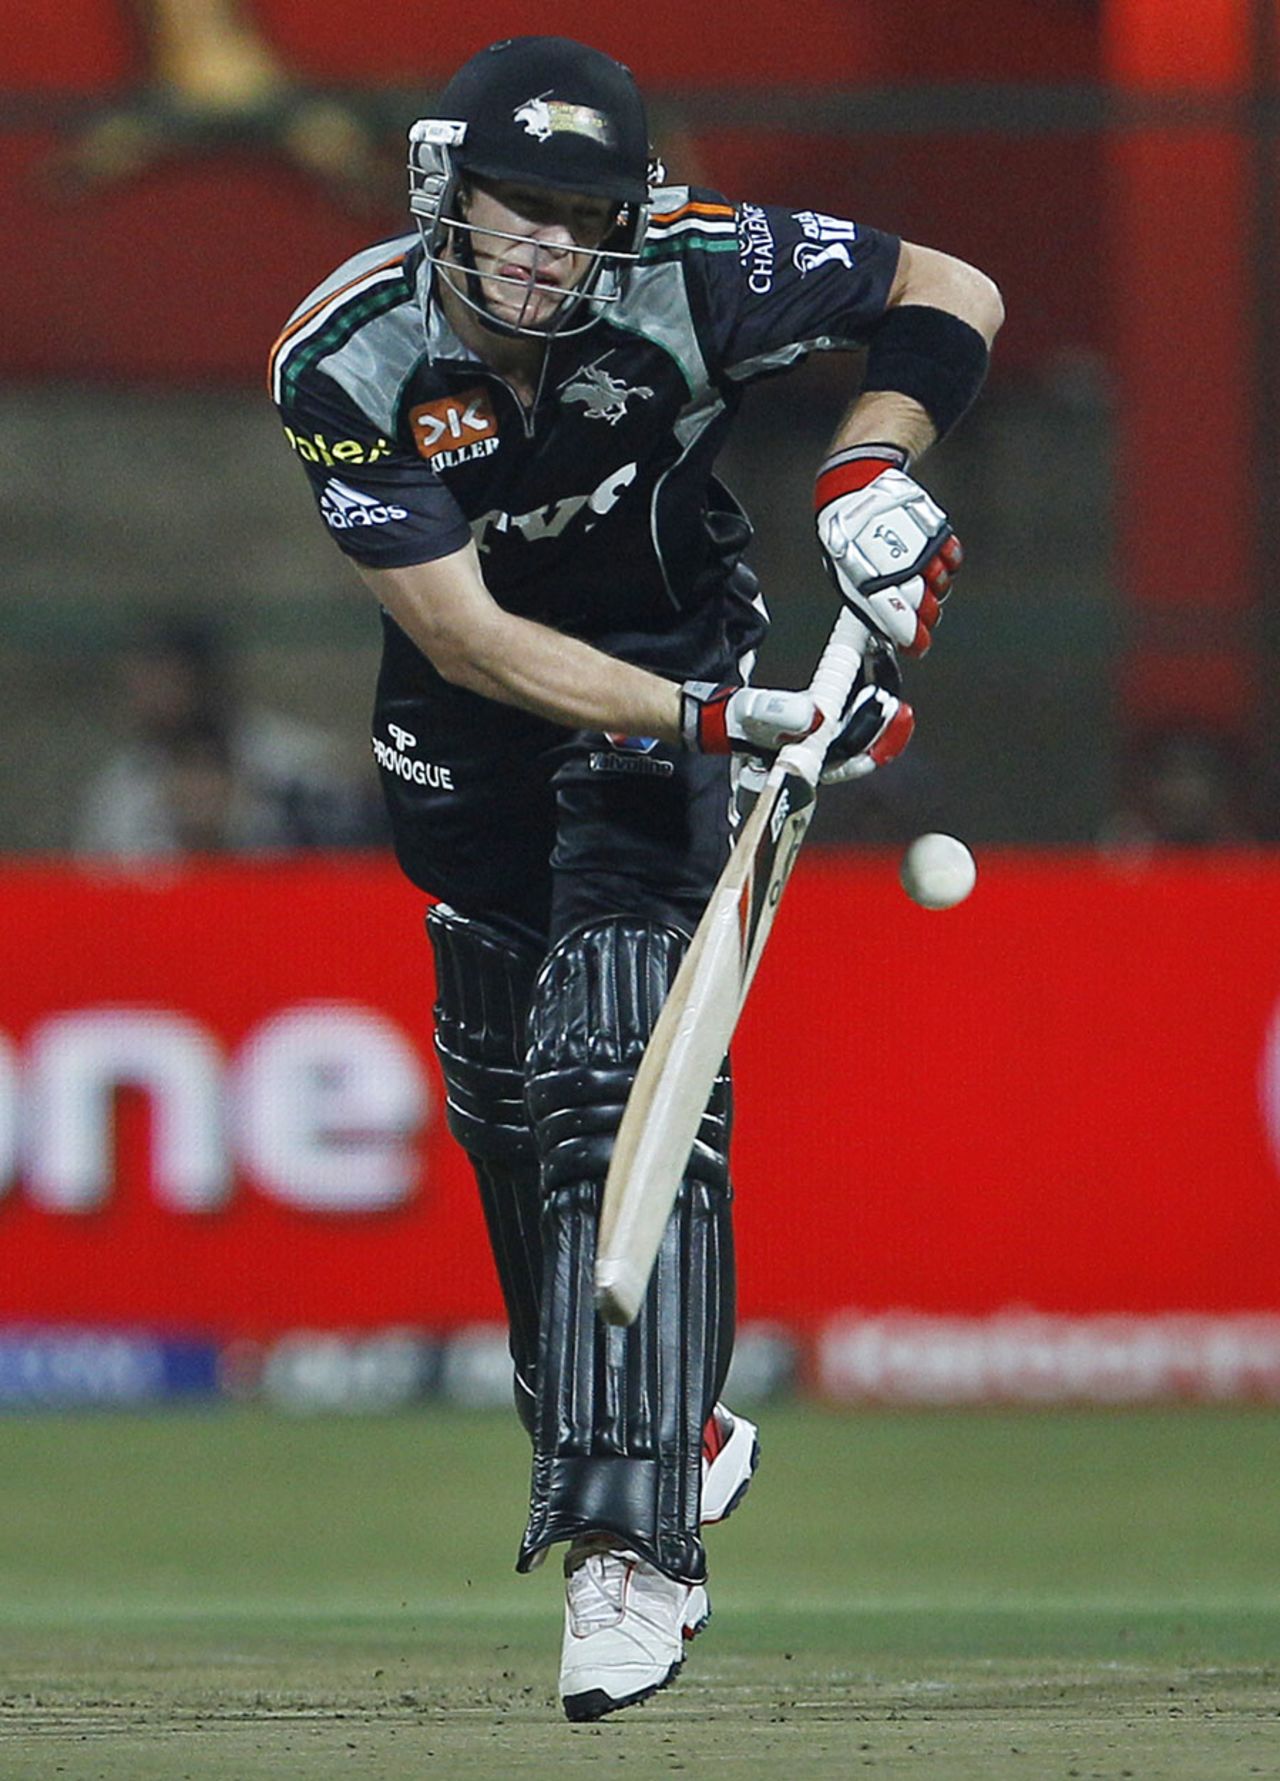 Tim Paine gets on his toes to play one to the leg side, Royal Challengers Bangalore v Pune Warriors, IPL 2011, Bangalore, April 29, 2011